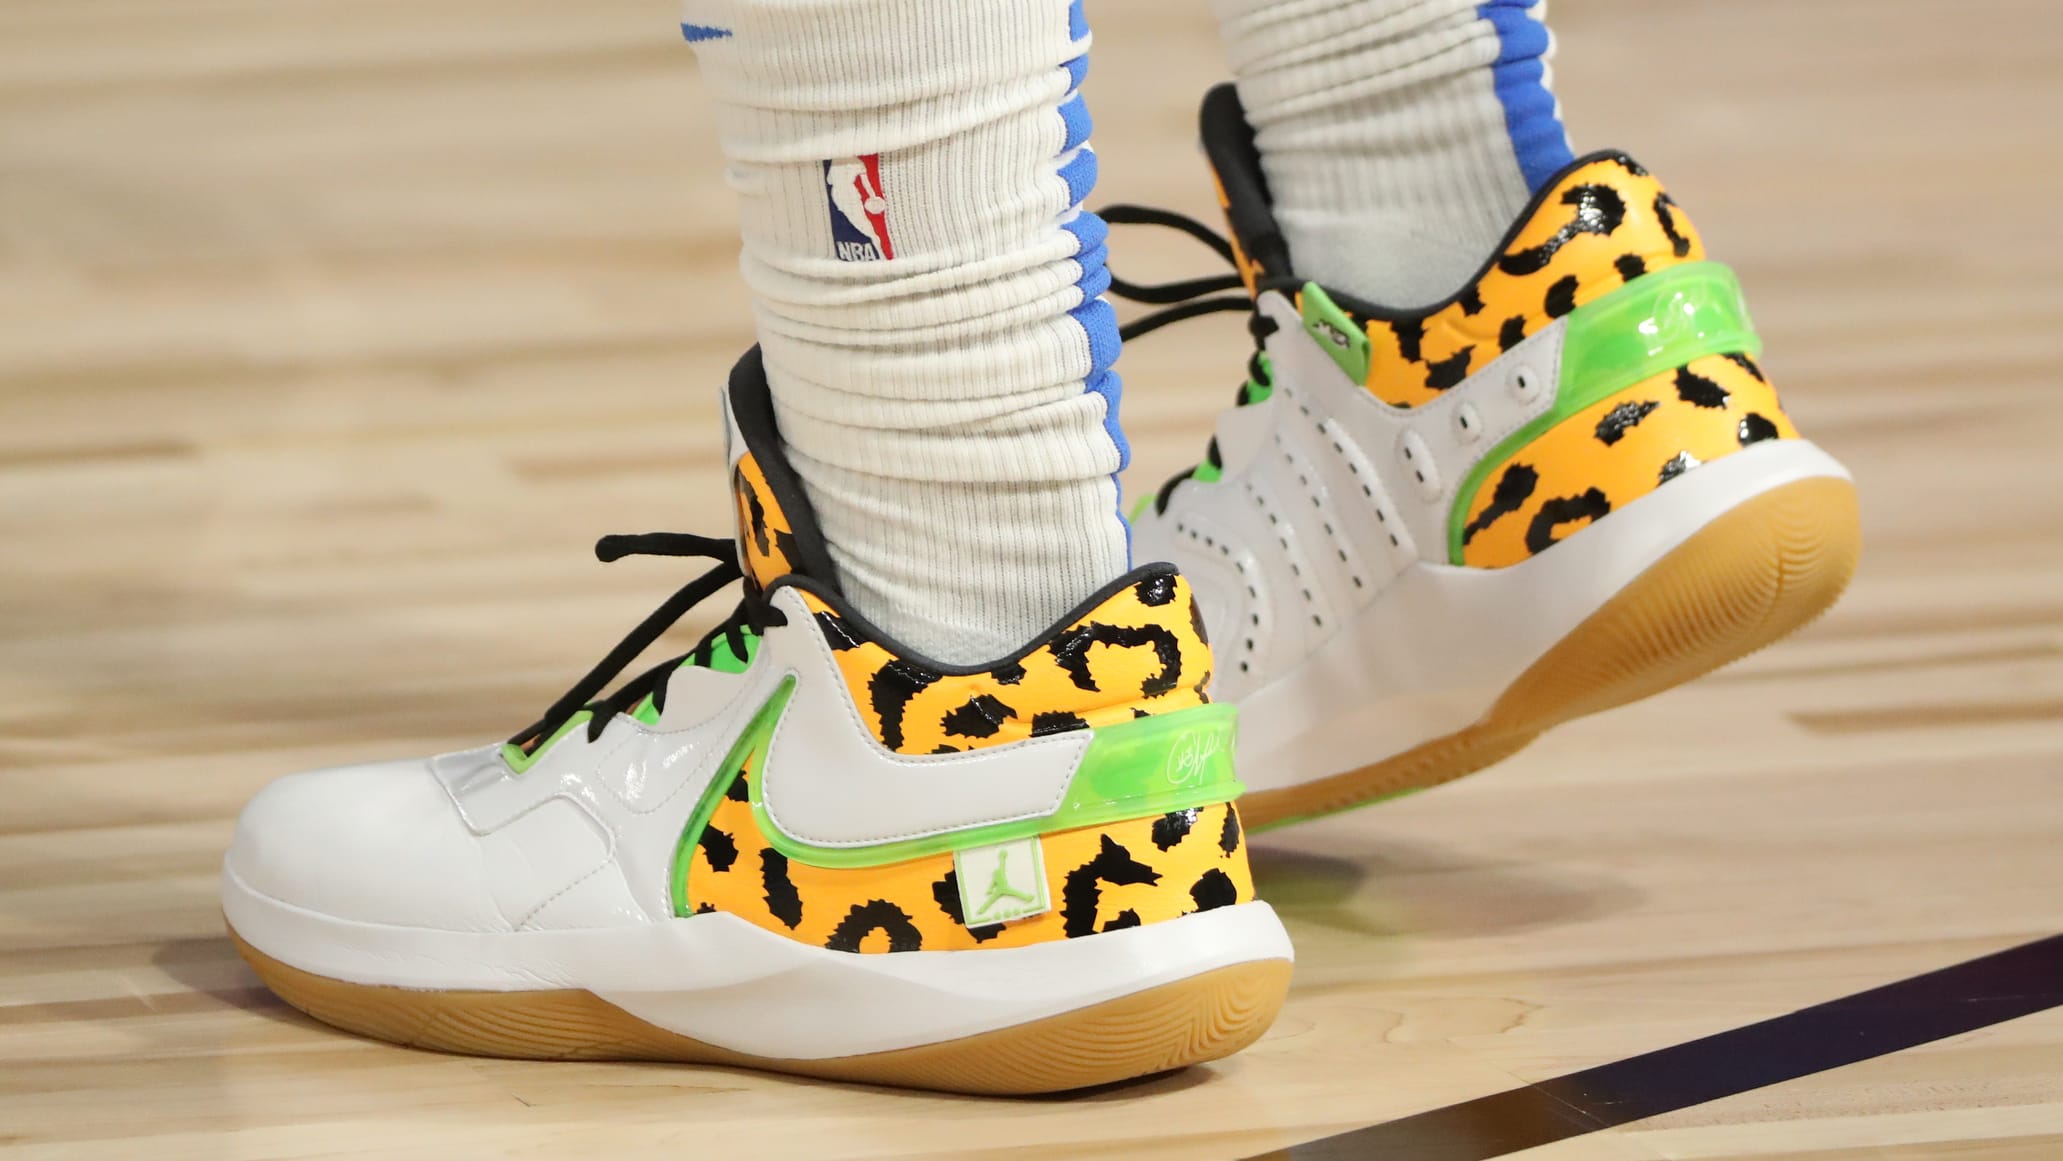 Nice Kicks on X: Zach Lavine laced up the Adidas Exhibit A at